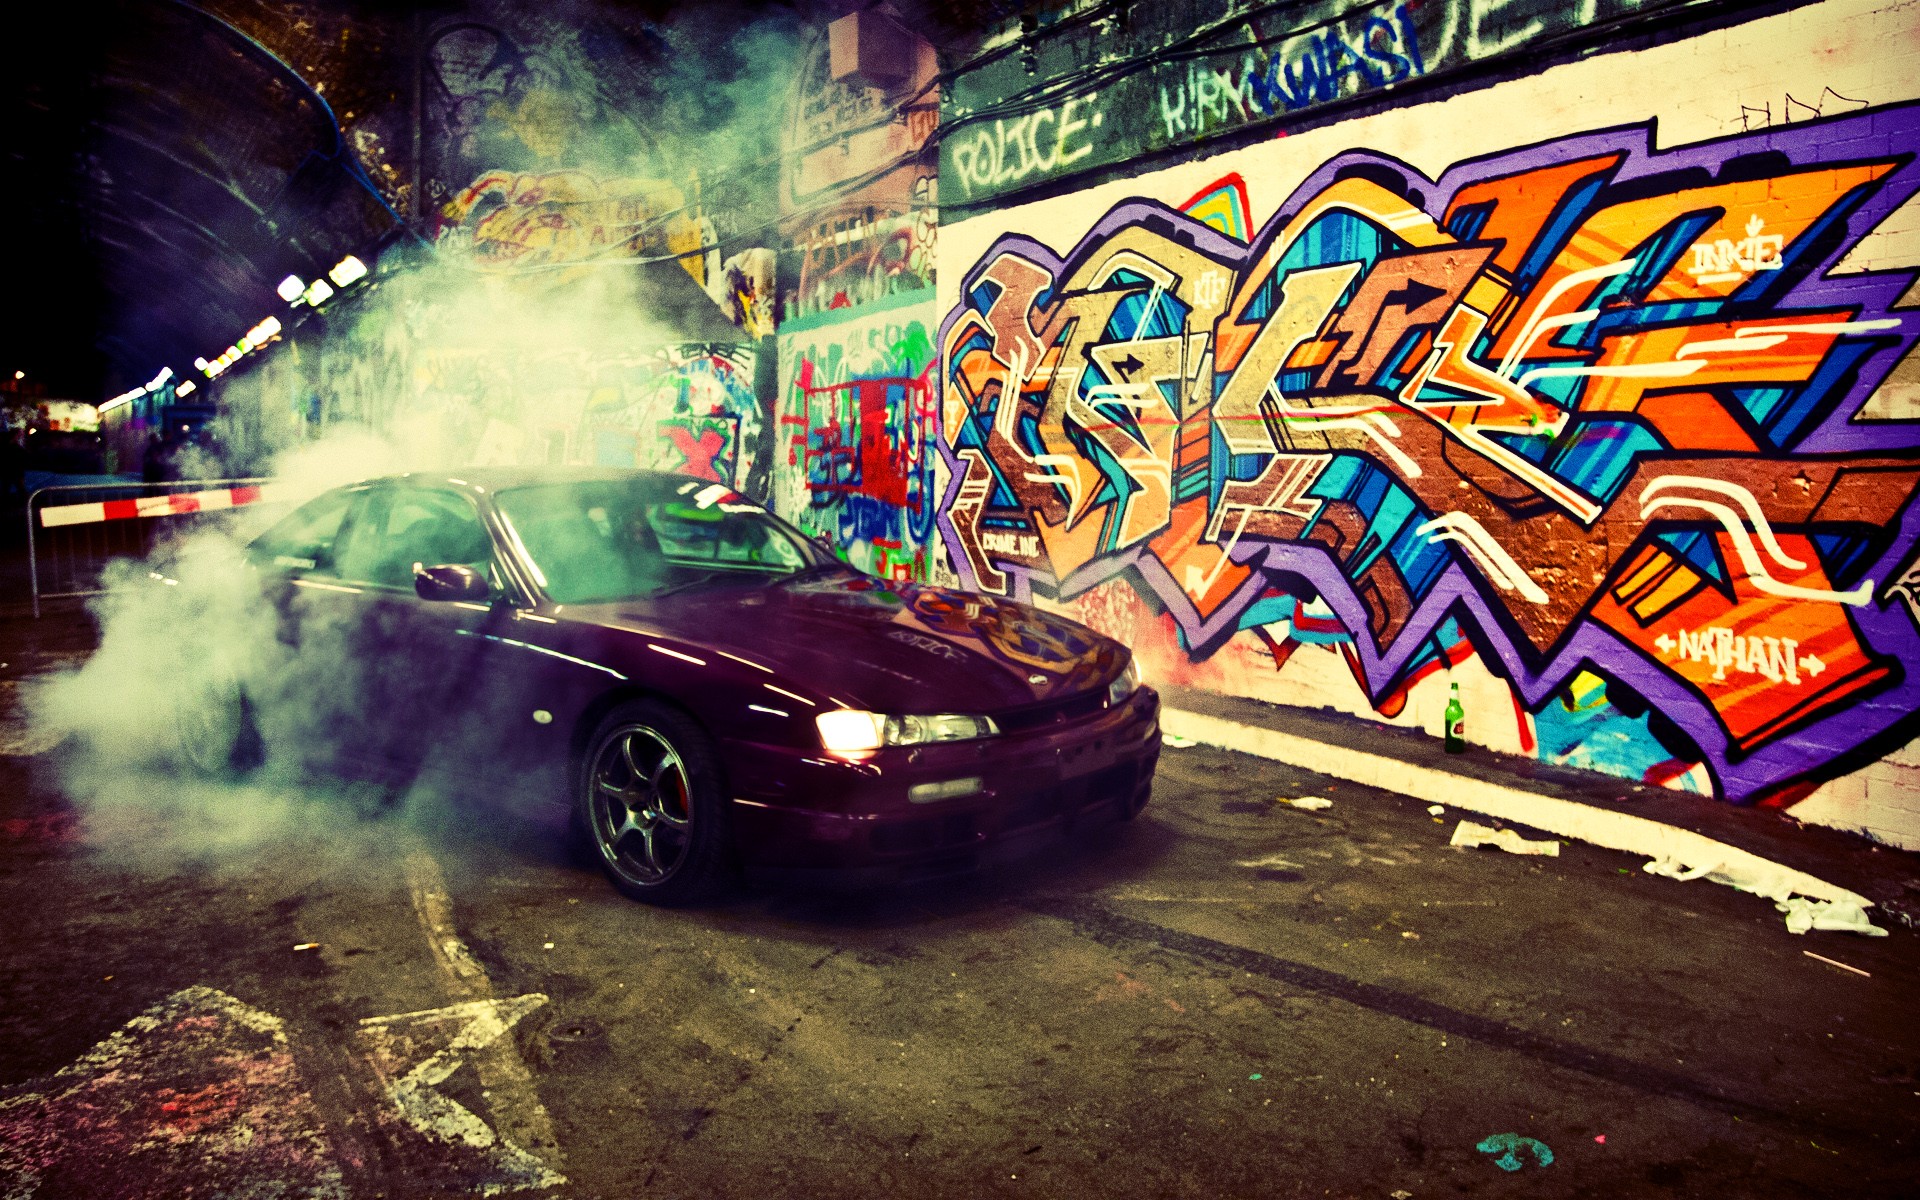 most-downloaded-burnout-wallpapers-full-hd-wallpaper-search-chargers-graffiti-art-wallpaper-hd-2013-for-iphone-wallpapers-free-android-5-ipad-2012-border